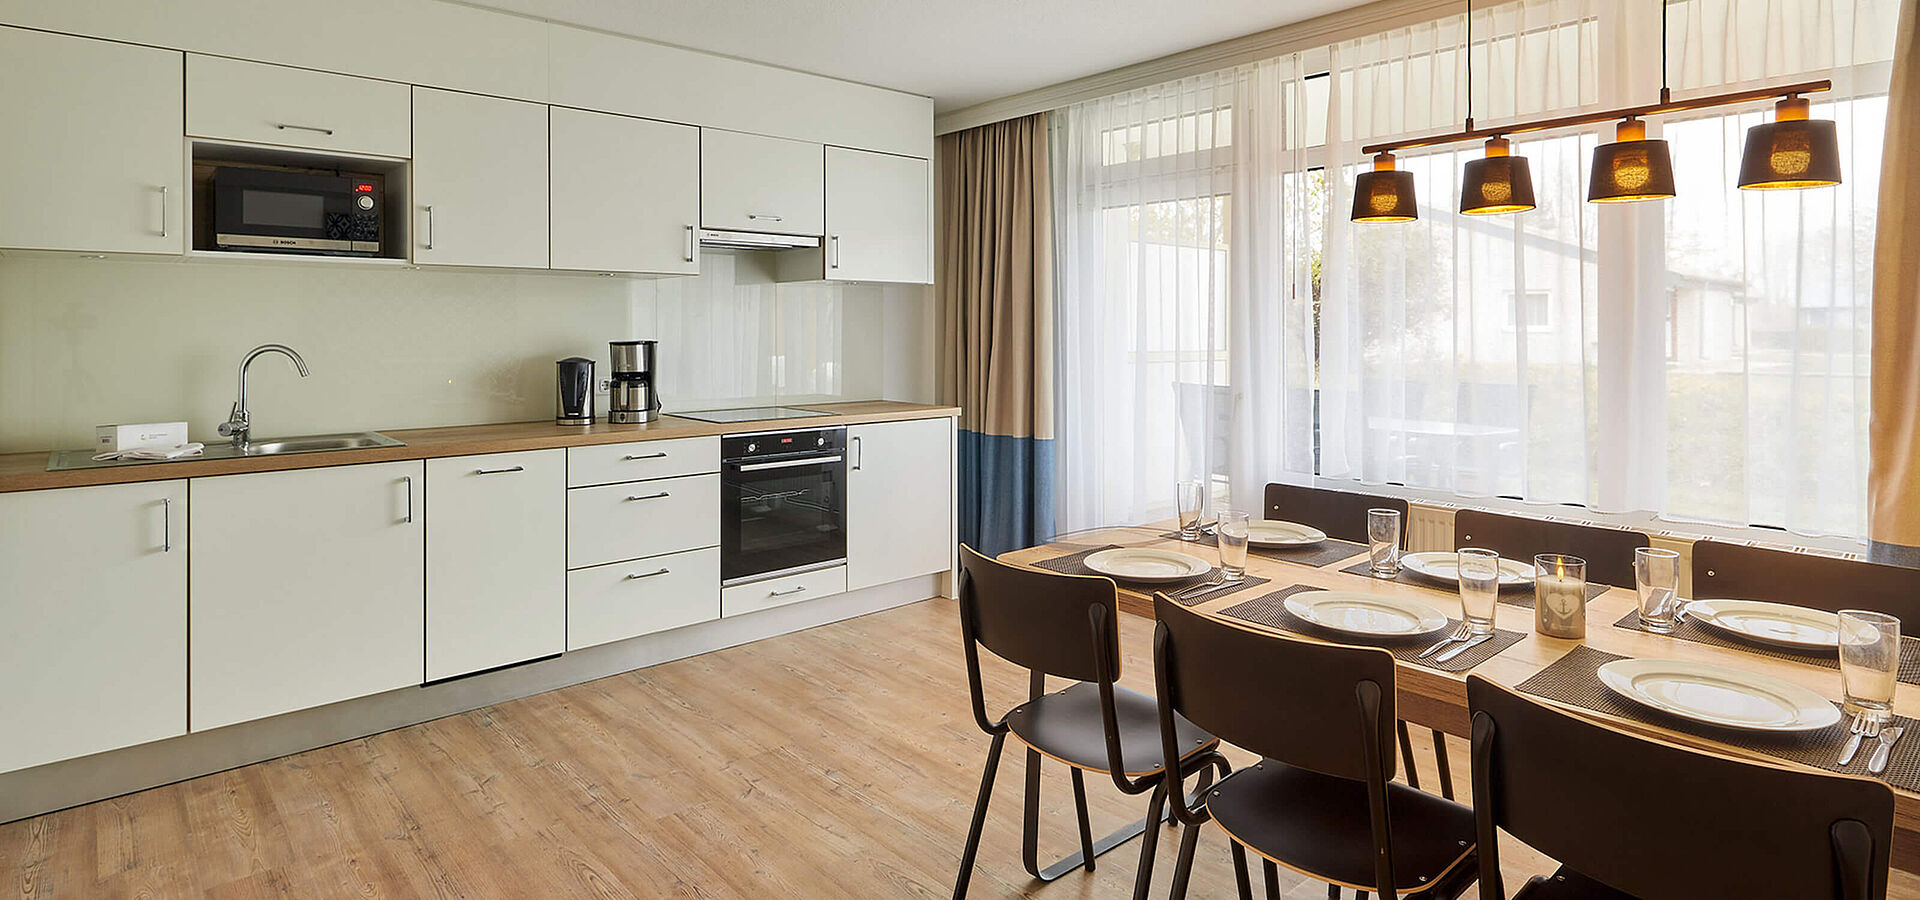 Garden apartment 80 m² - Family holiday at the baltic sea 